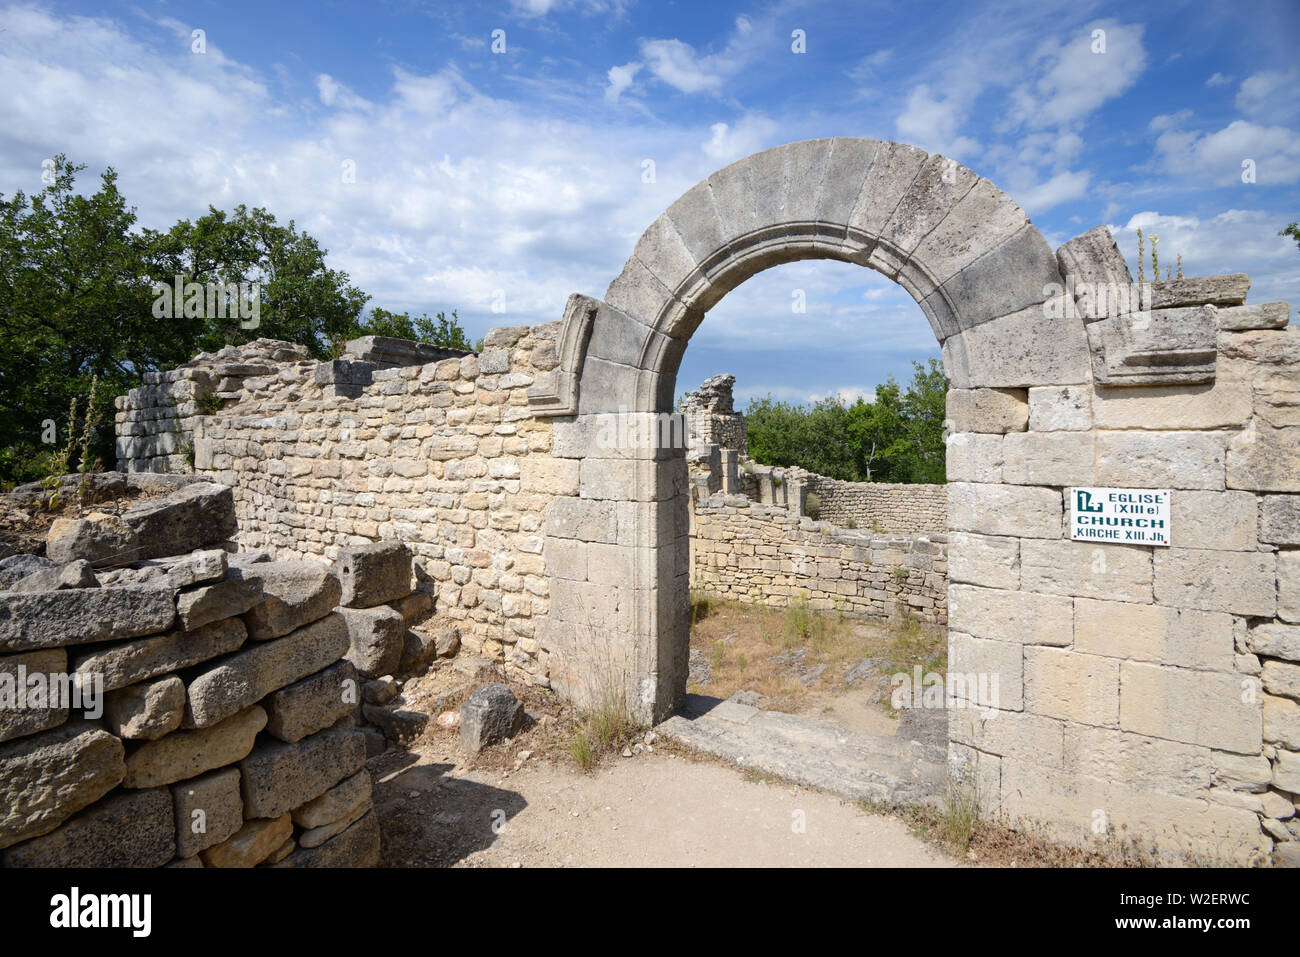 Entrance to Ruined c13th Church in the Abandoned Medieval Village of Buoux, Buoux Fort or Fort de Buoux, Luberon Provence France Stock Photo